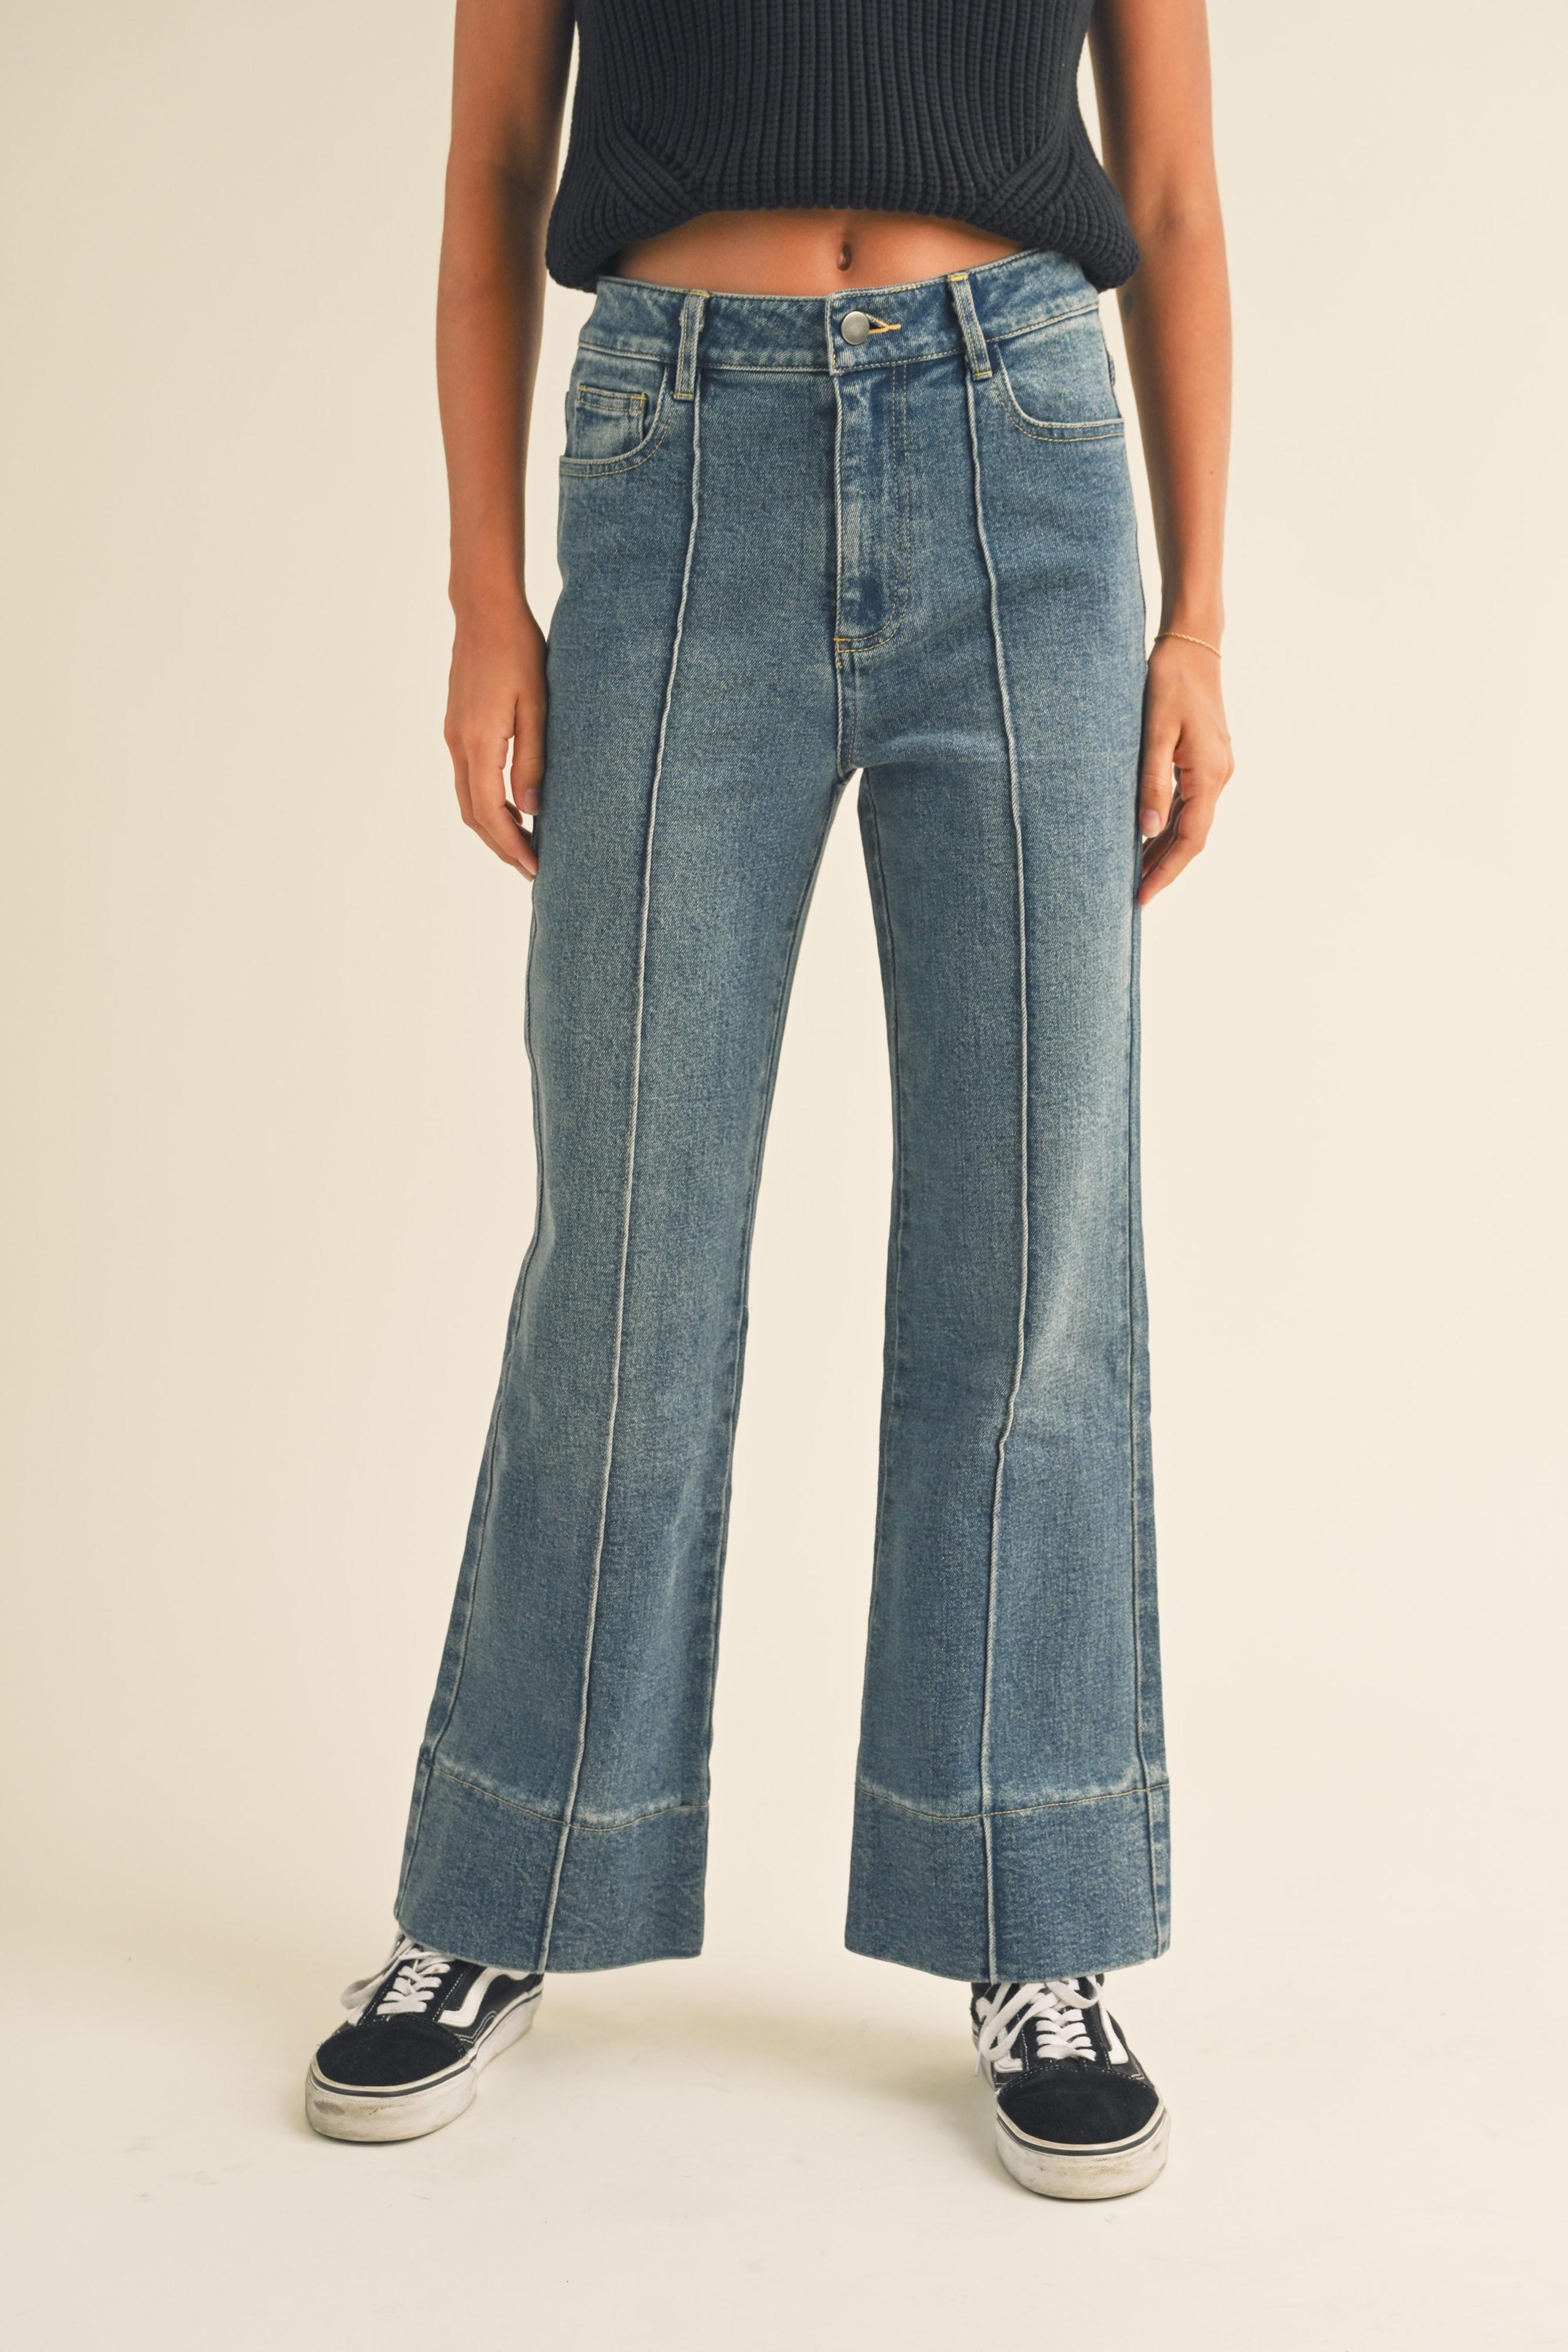  By The Books Pleated Jeans